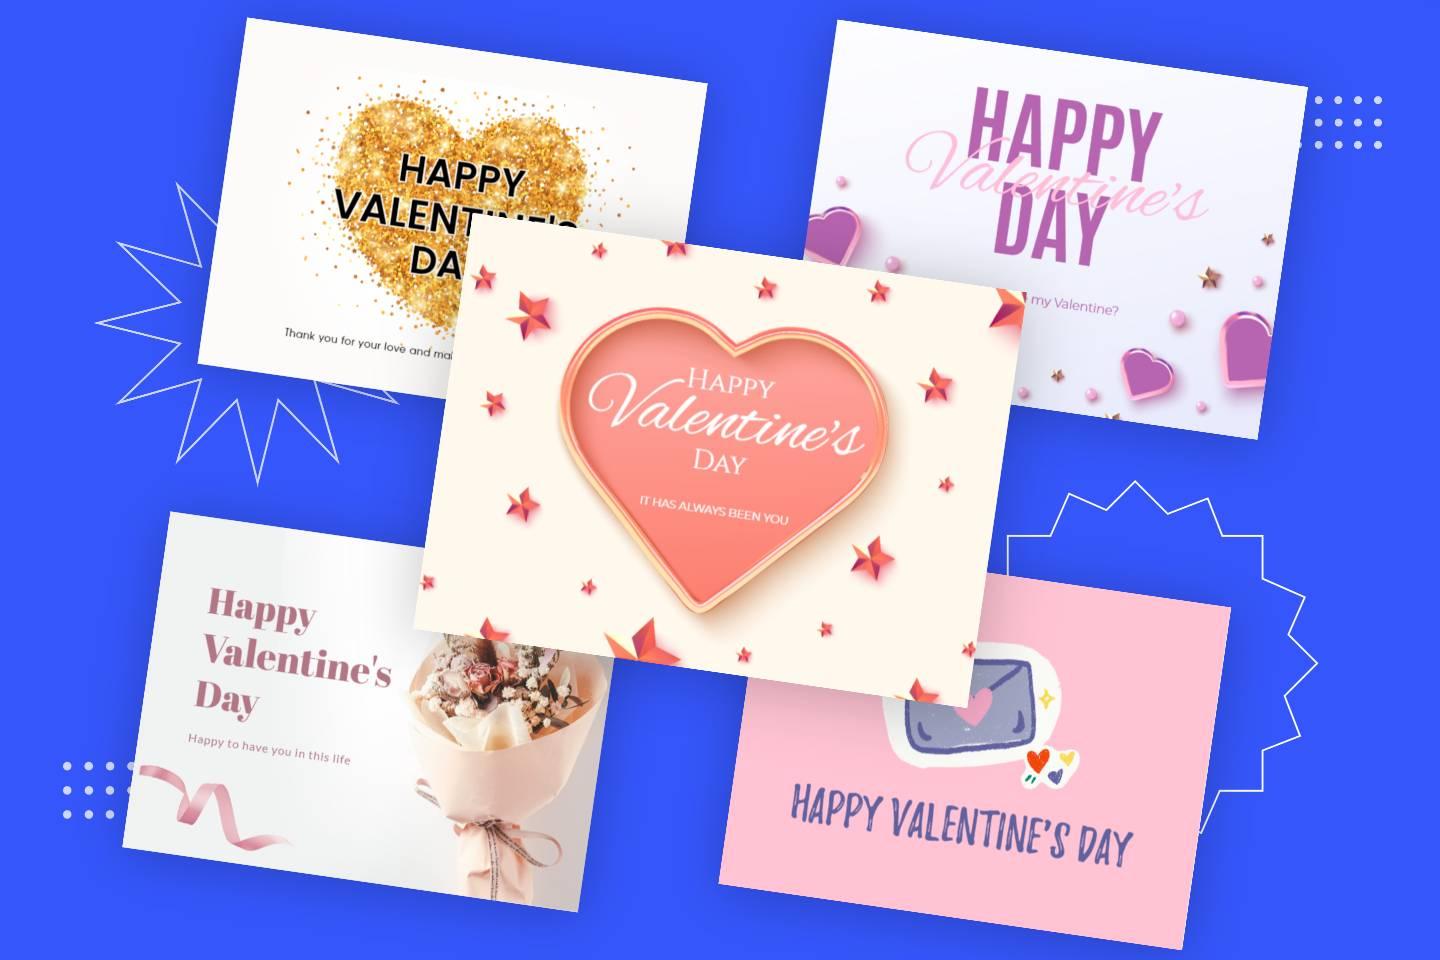 https://imgv3.fotor.com/images/share/Create-Valentine-cards-online-free-with-Fotor-Valentines-Day-card-maker.jpg